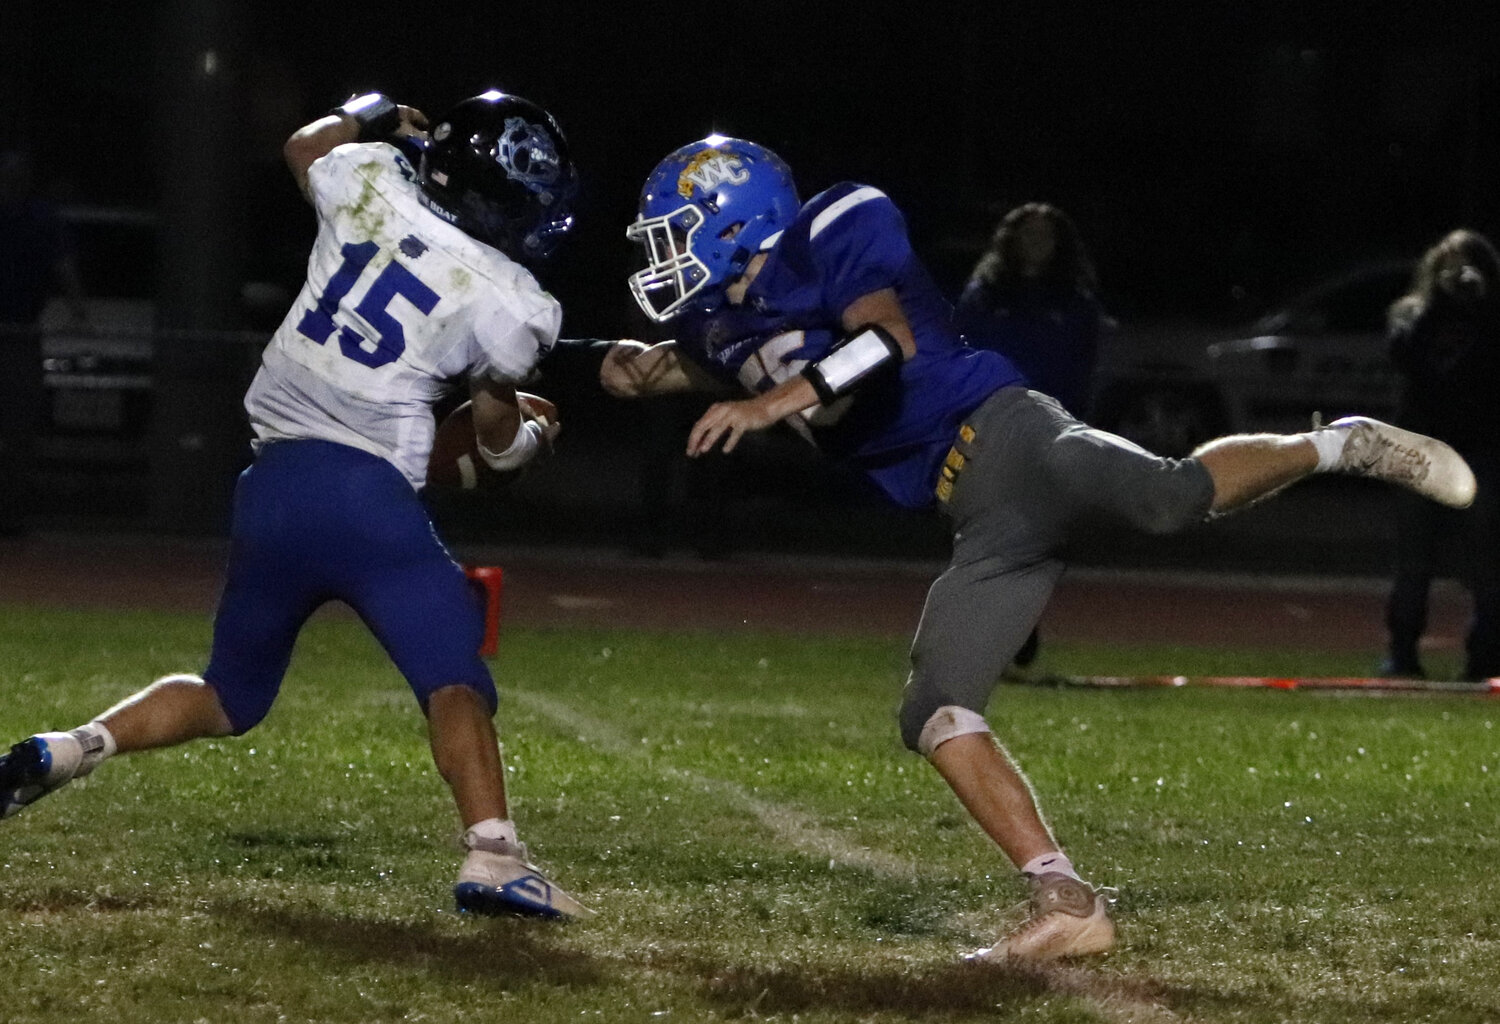 Devin Myers brings down the South Callaway quarterback during a game this past season. Myers was a unanimous Eastern Missouri Conference first team selection at defensive end.